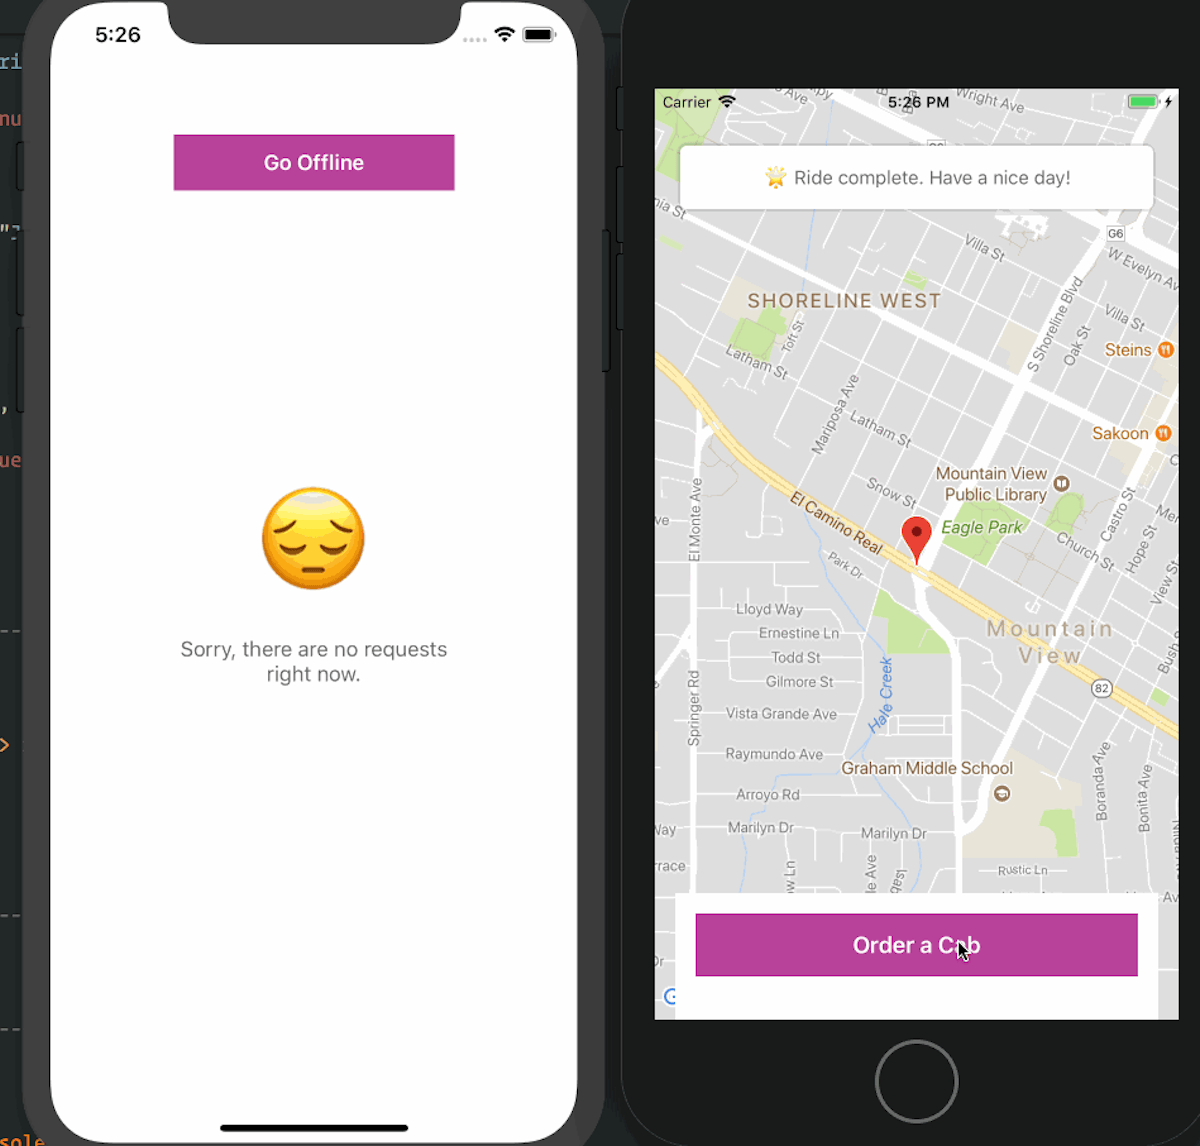 featured image - Build a ride sharing iOS app with push notifications.